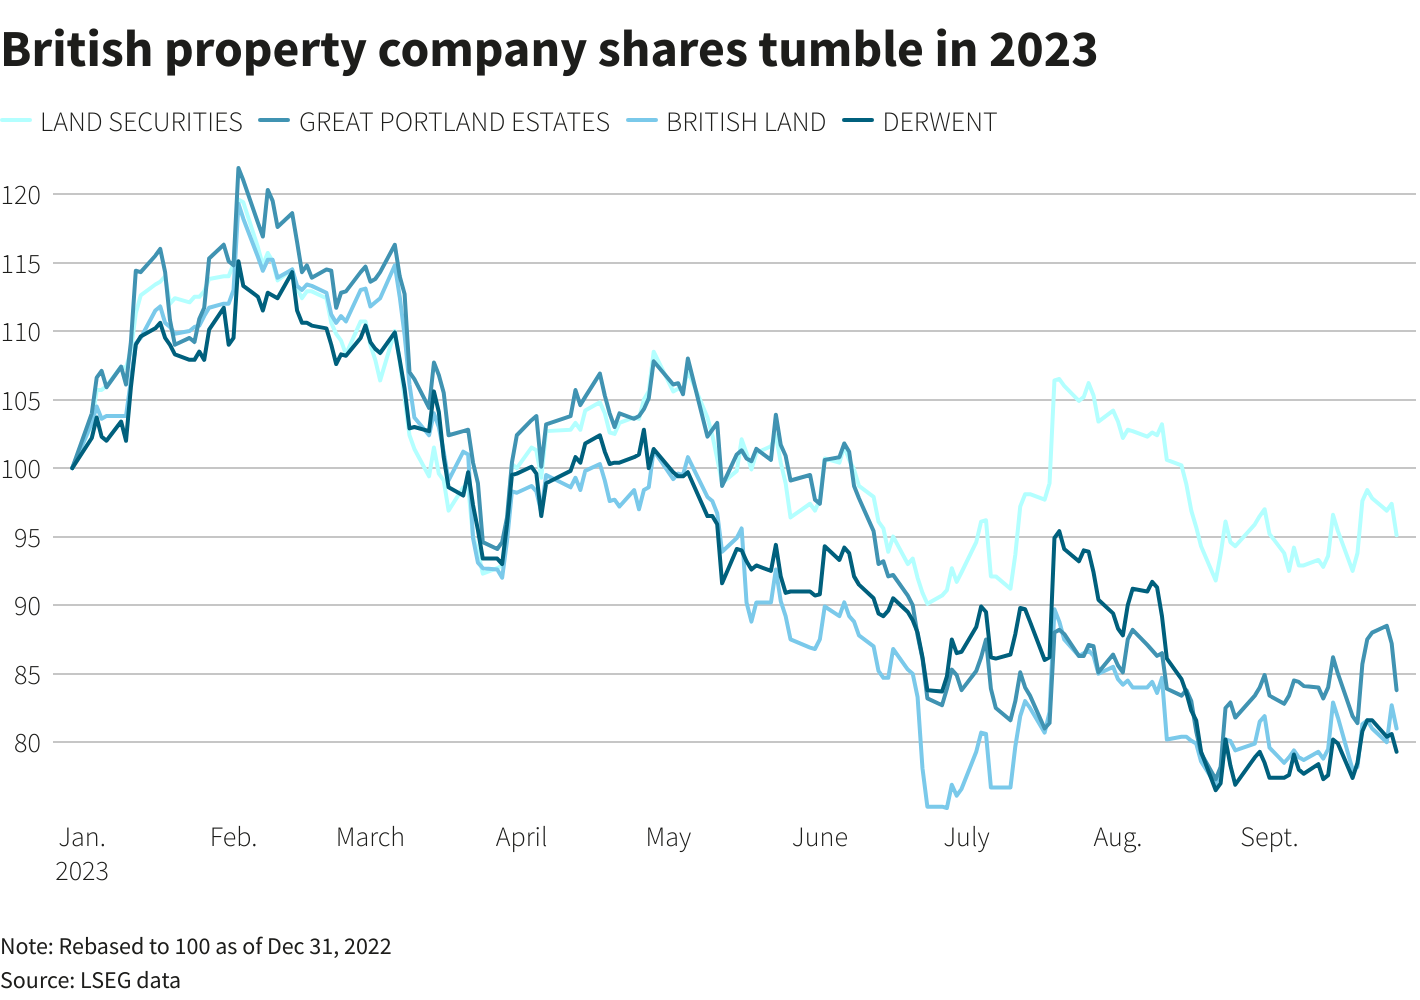 British property company shares tumble in 2023